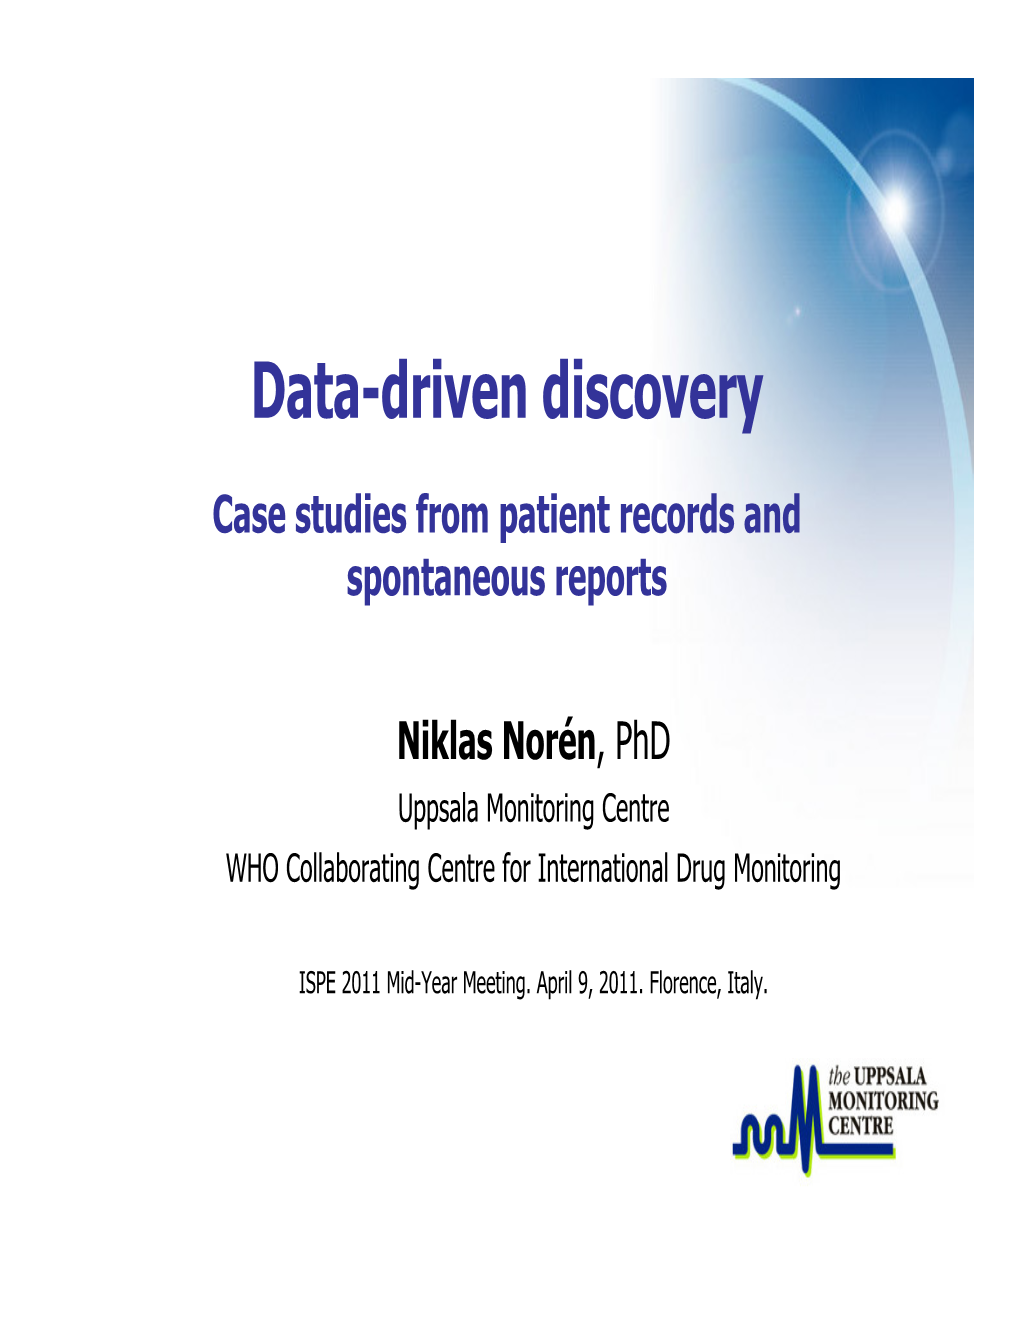 Data Driven Discovery